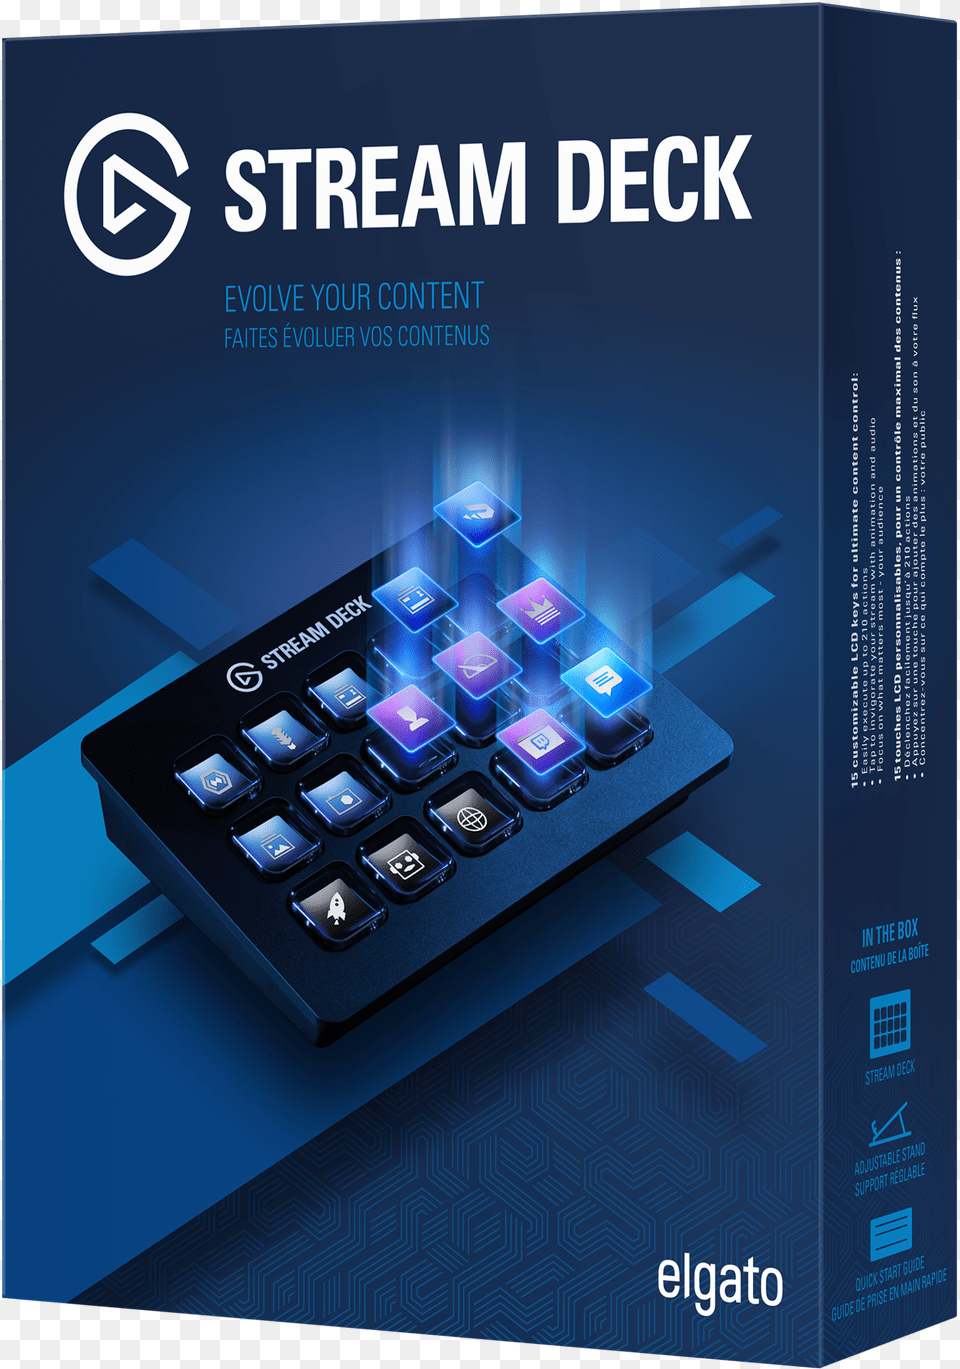 Content Elgato Stream Deck Keyboard, Advertisement, Poster Free Png Download